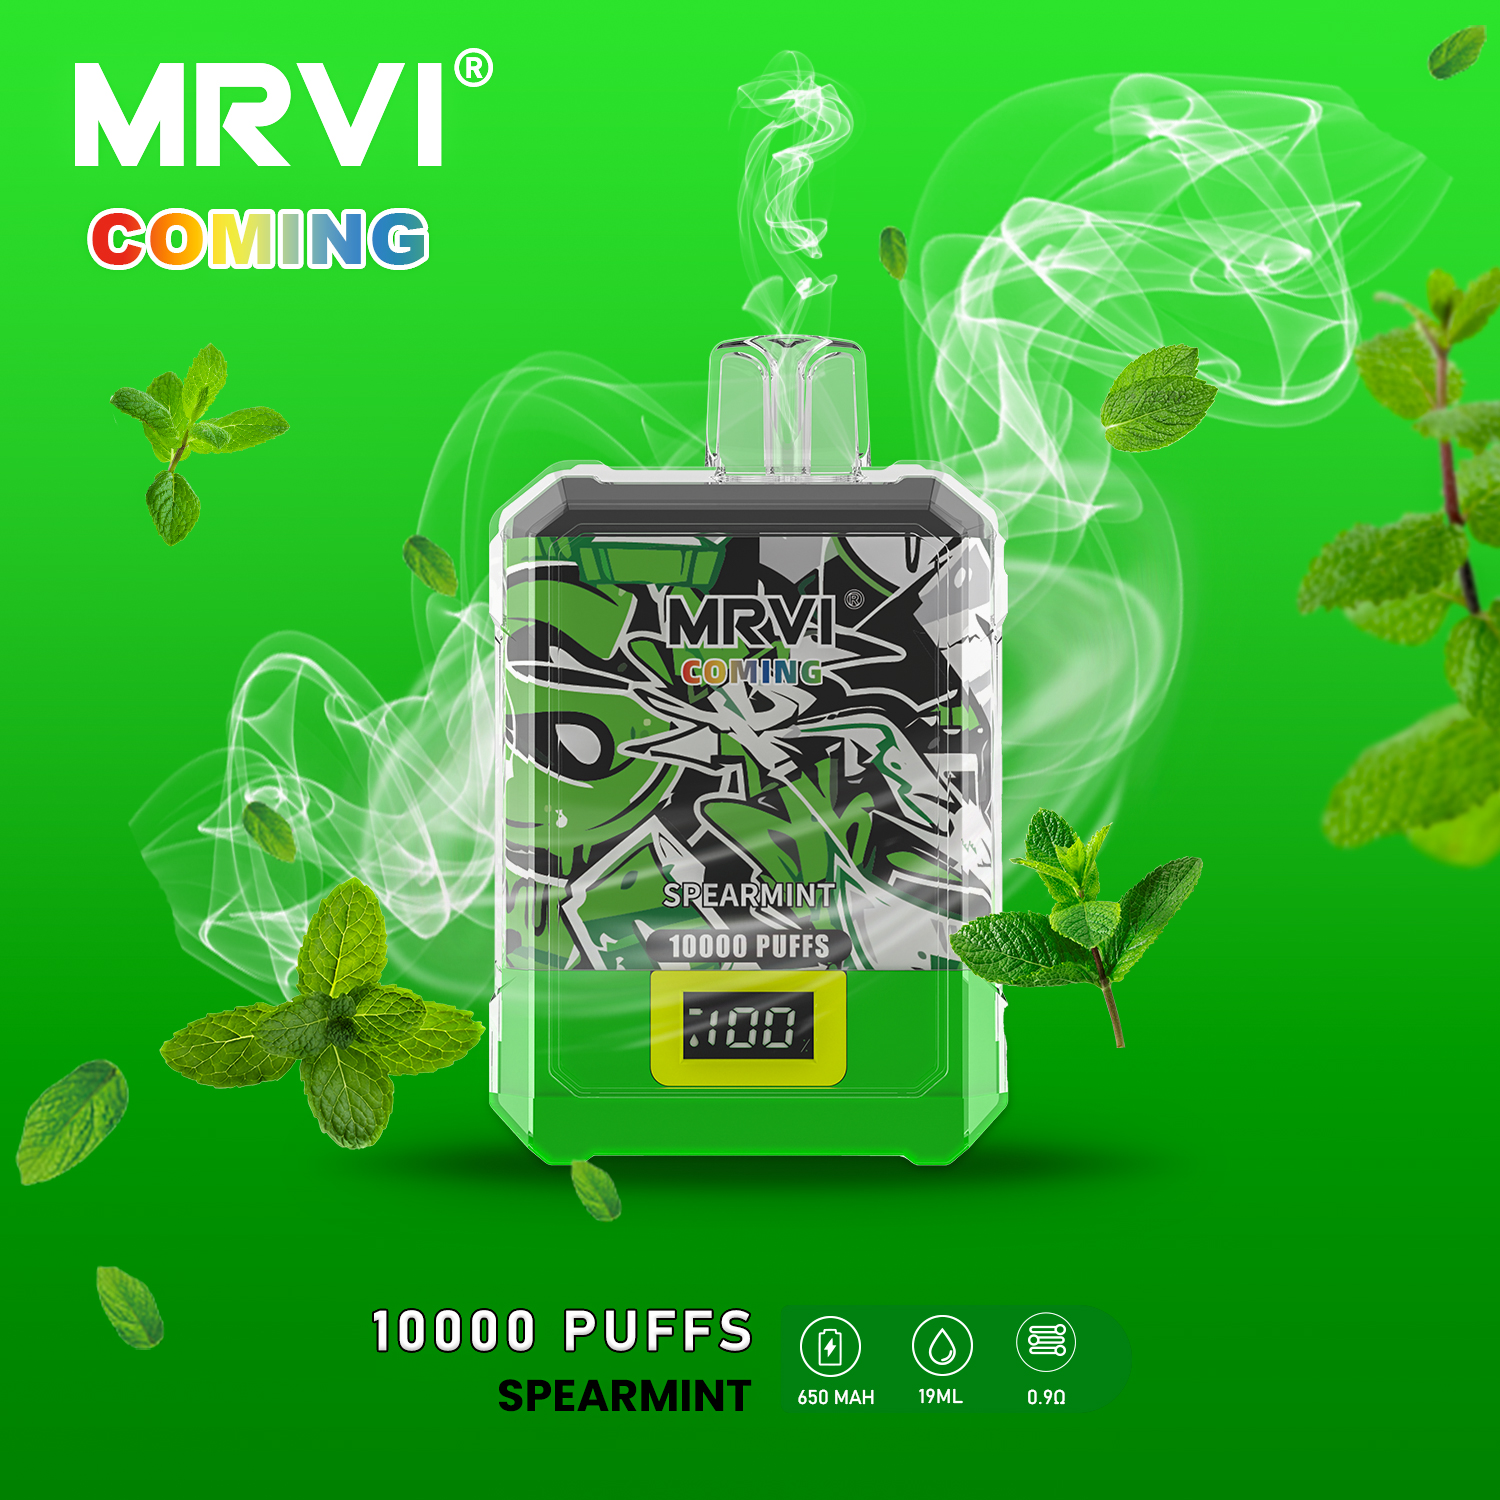 Original Mrvi Coming Digital Box 10000 10K Puffs Vape 650mAh Type-C Charging 19ml Prefilled Pod With Battery And Ejuice Display 10 Flavors 0% 2% 5% Disposable E Cigarettes